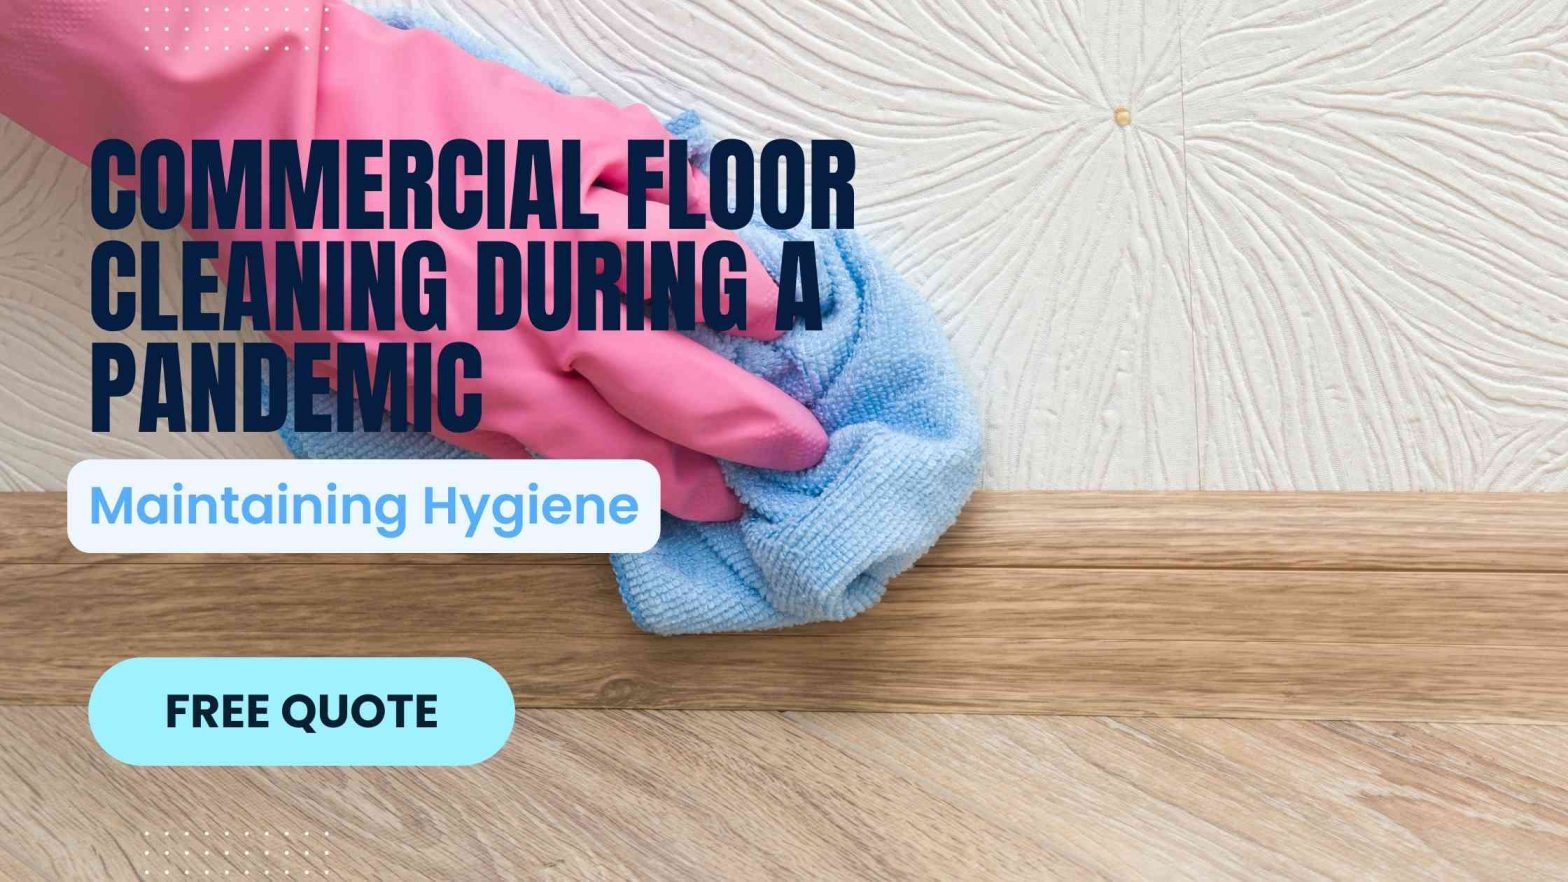 Maintaining Hygiene: Commercial Floor Cleaning During a Pandemic